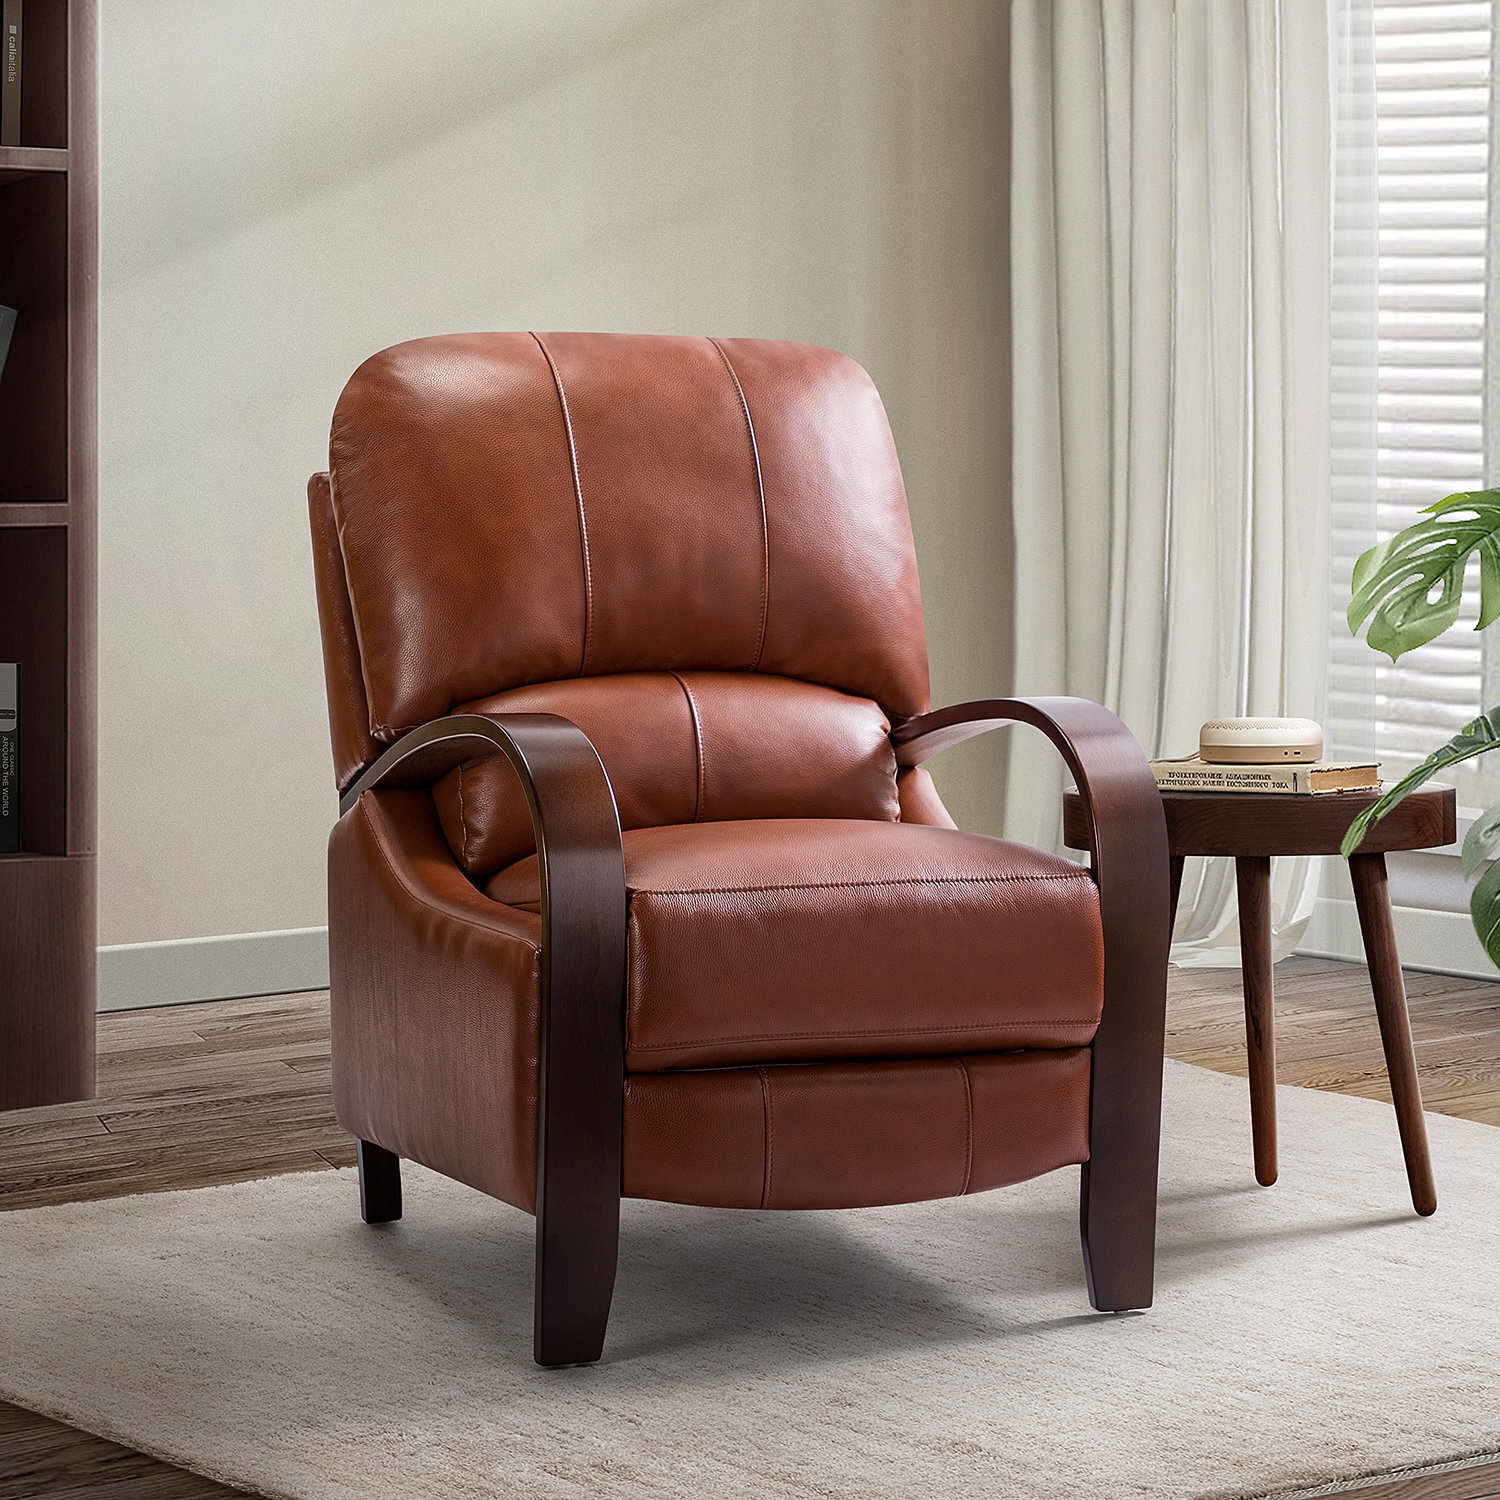 Contrasting Modern Leather Recliners